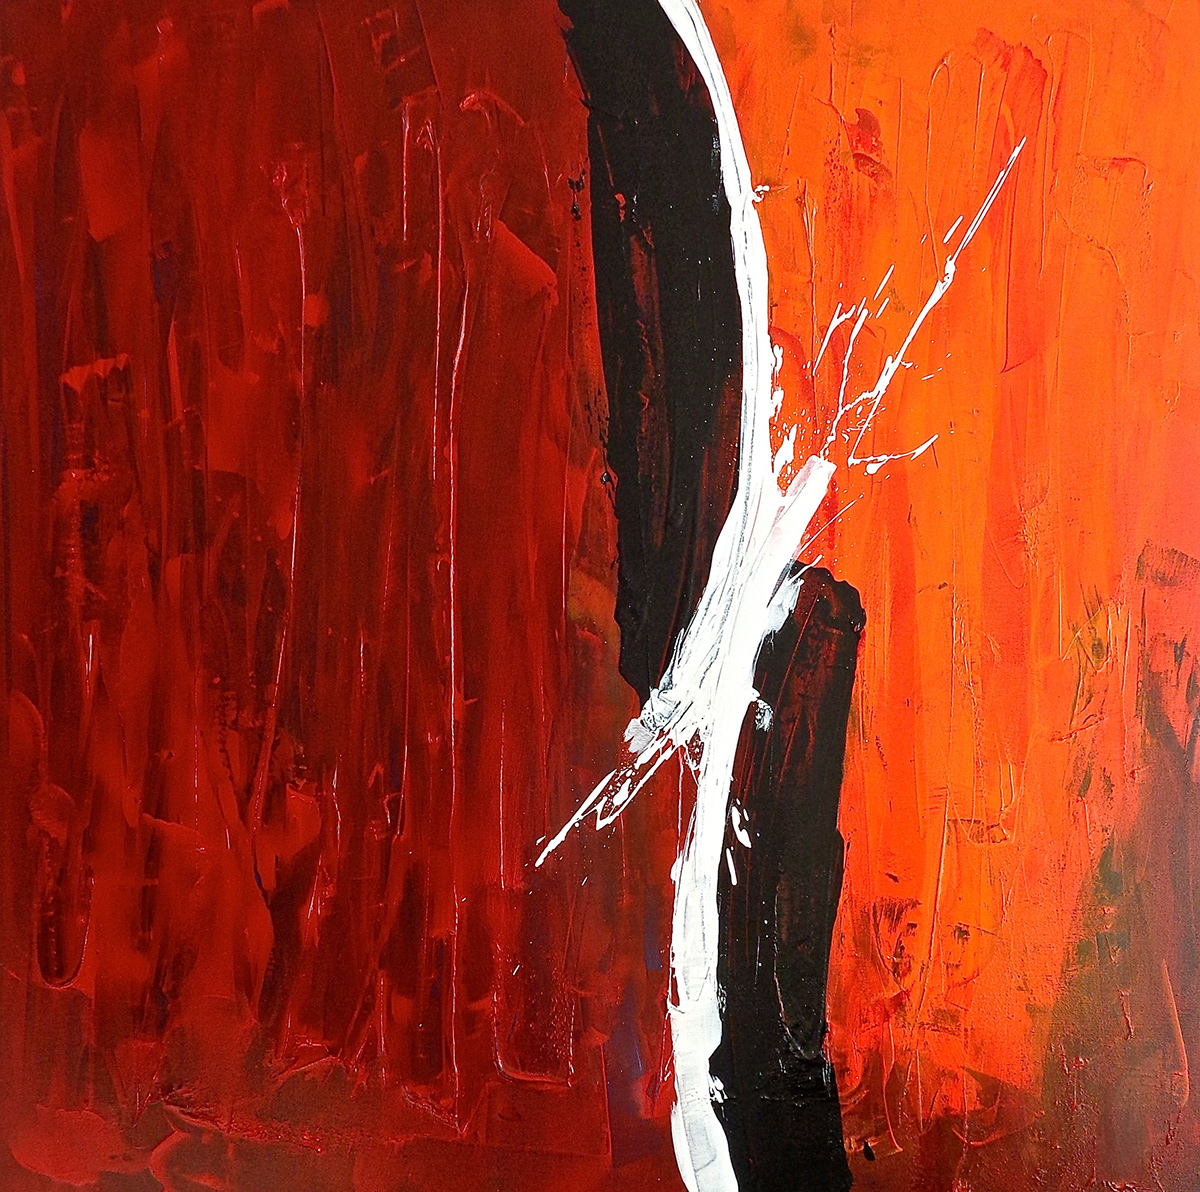 break break up choices new directions new chances contemporary modern abstract expressive